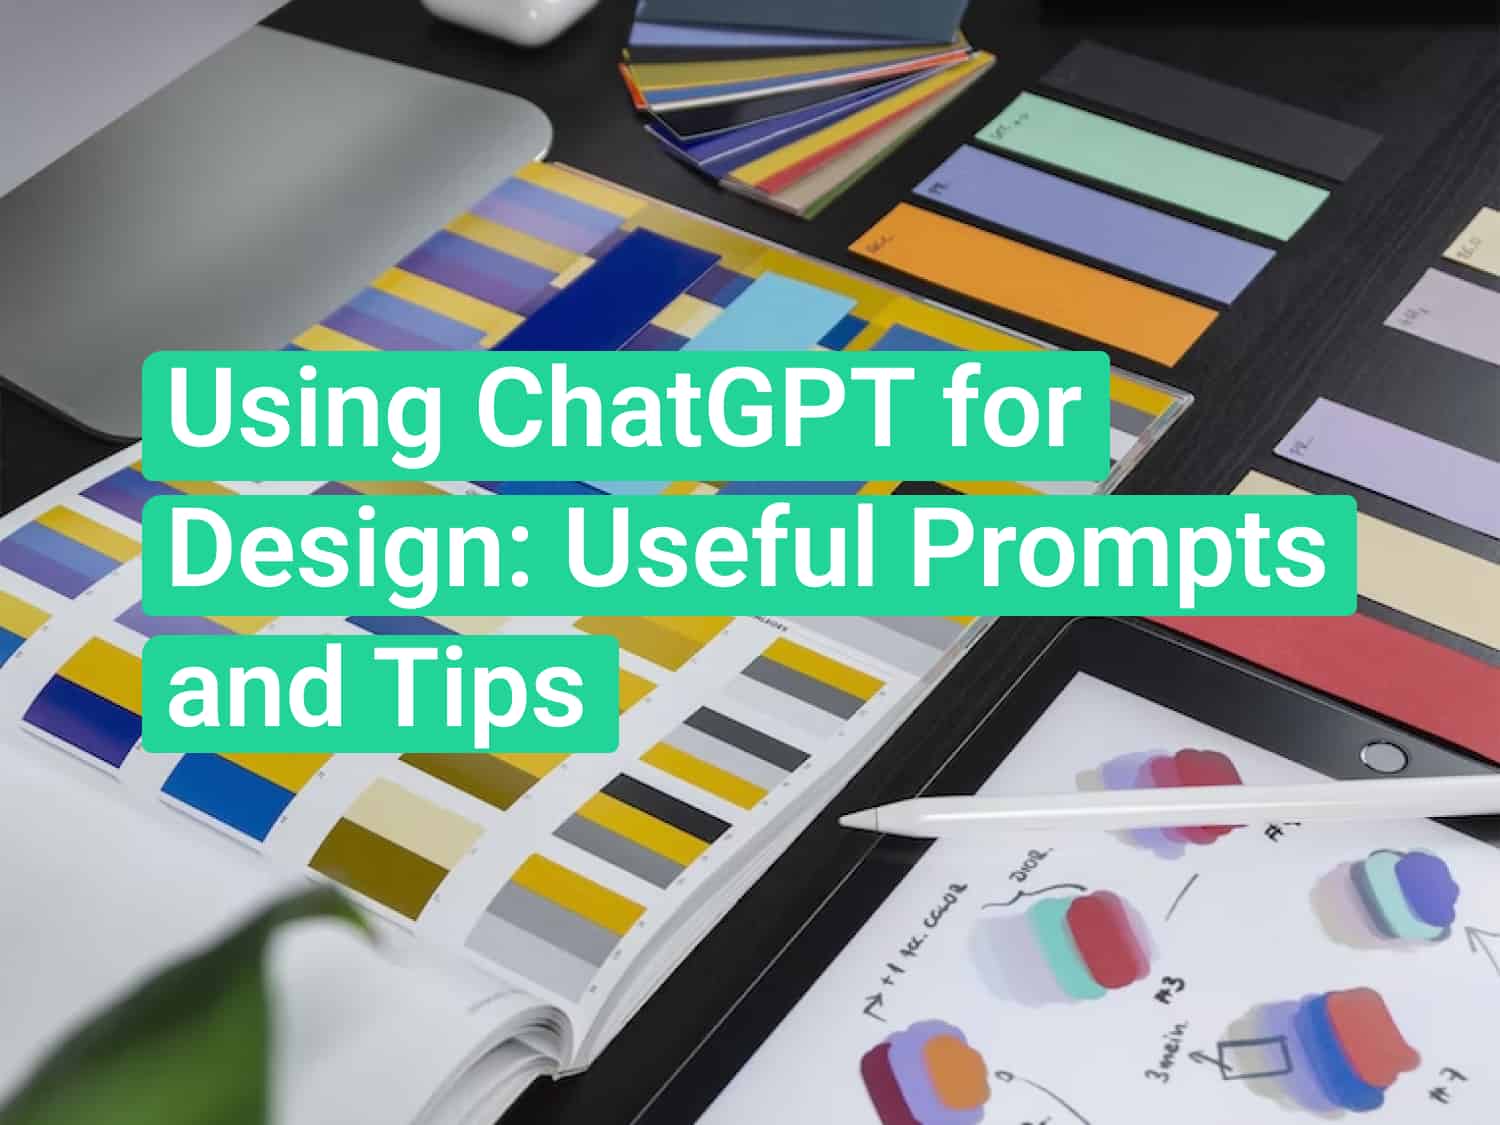 How to use ChatGPT for design inspiration